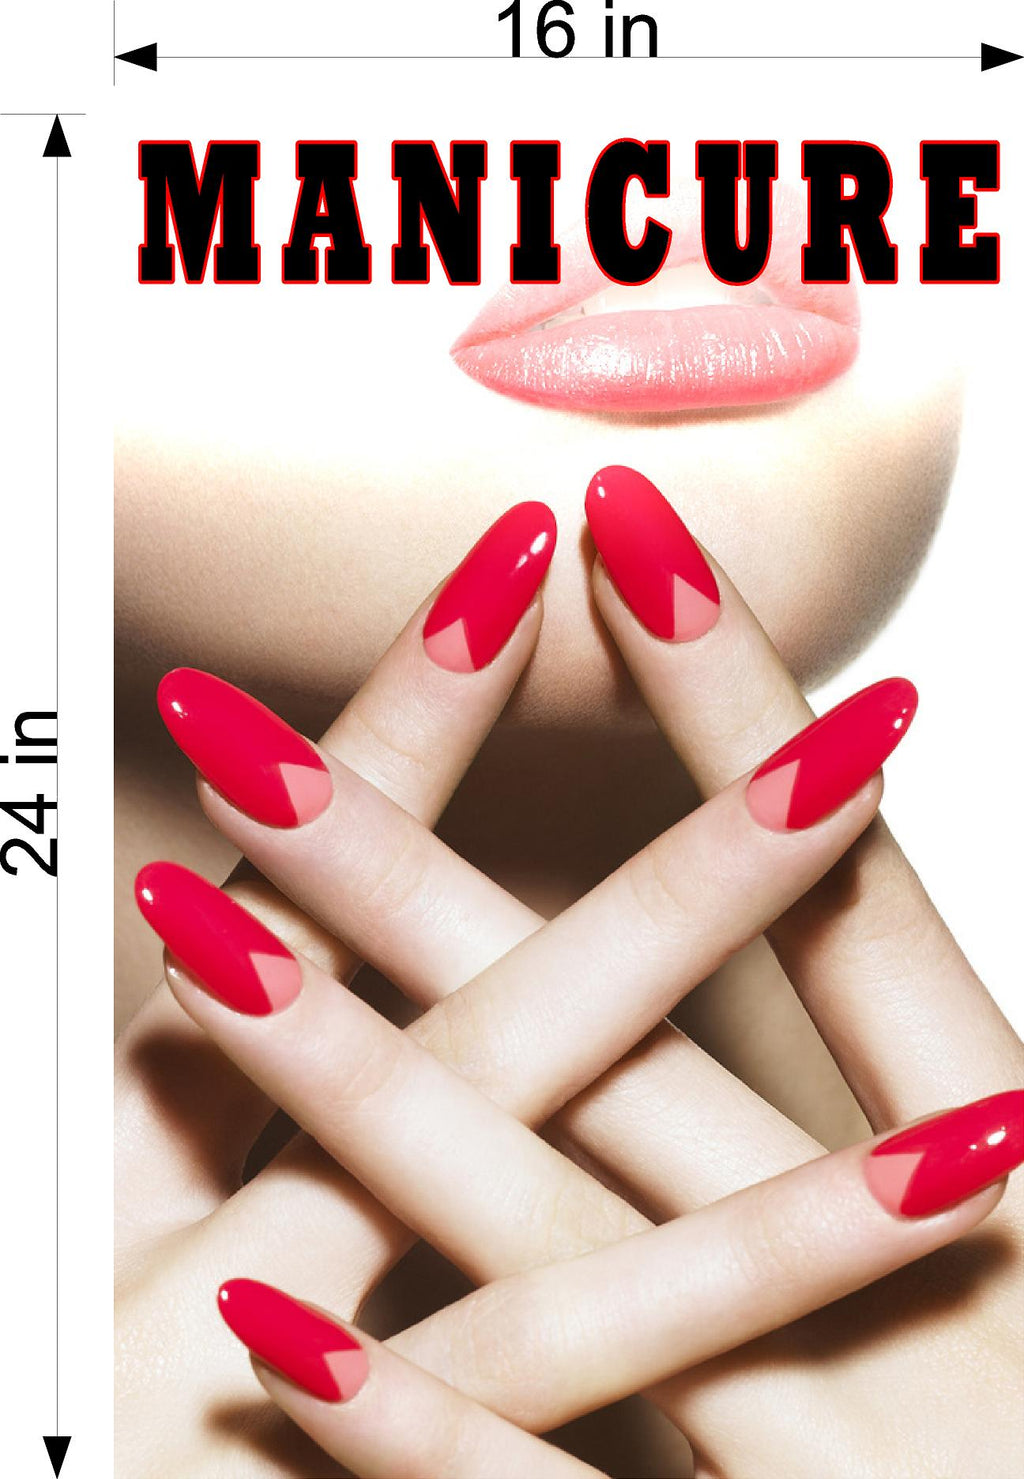 Manicure 14 Perforated Mesh One Way Vision See-Through Window Vinyl Nail Salon Sign Vertical